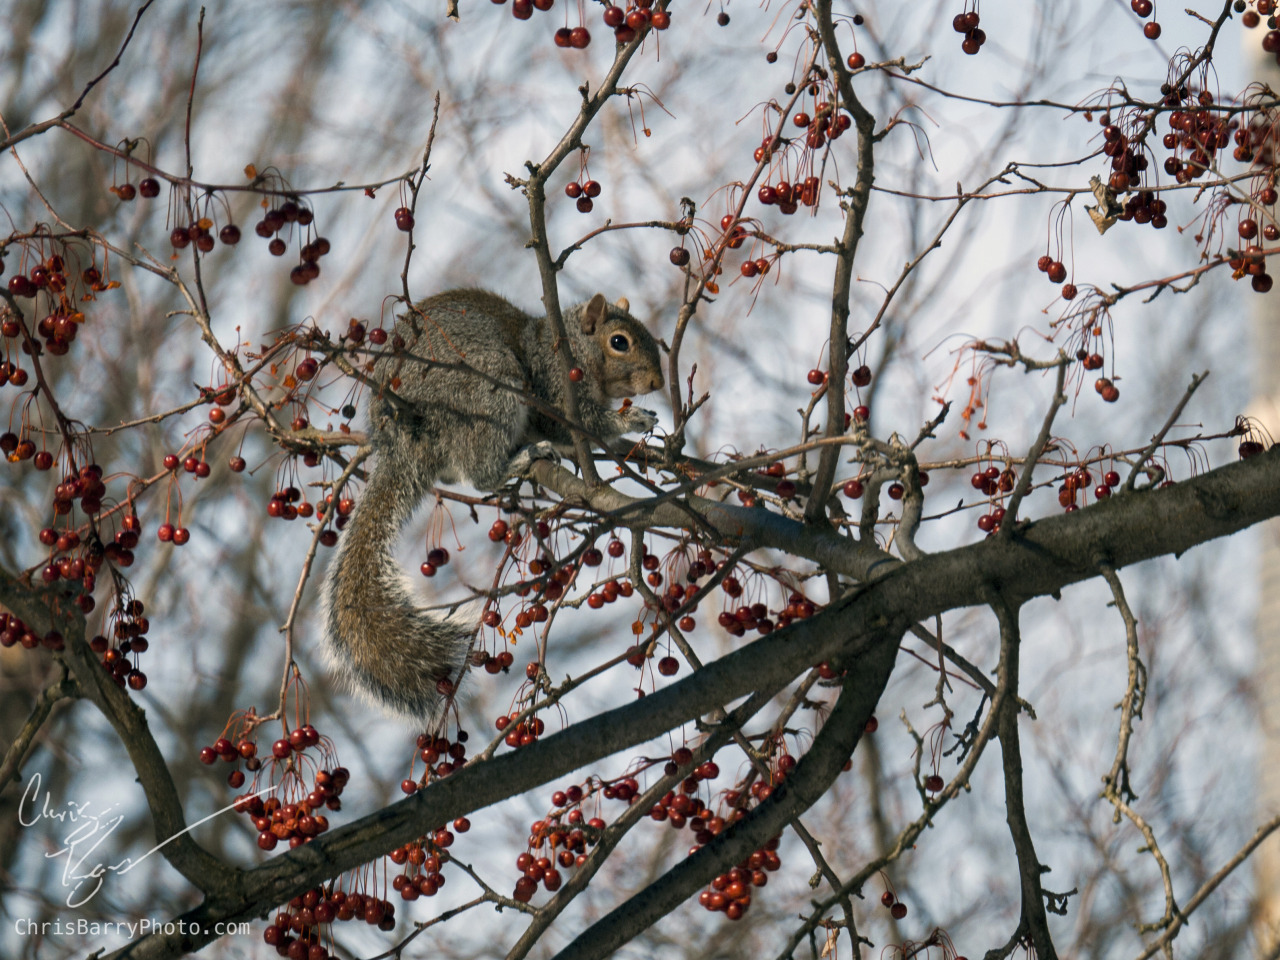 And probably my favorite, one of our (many) squirrels